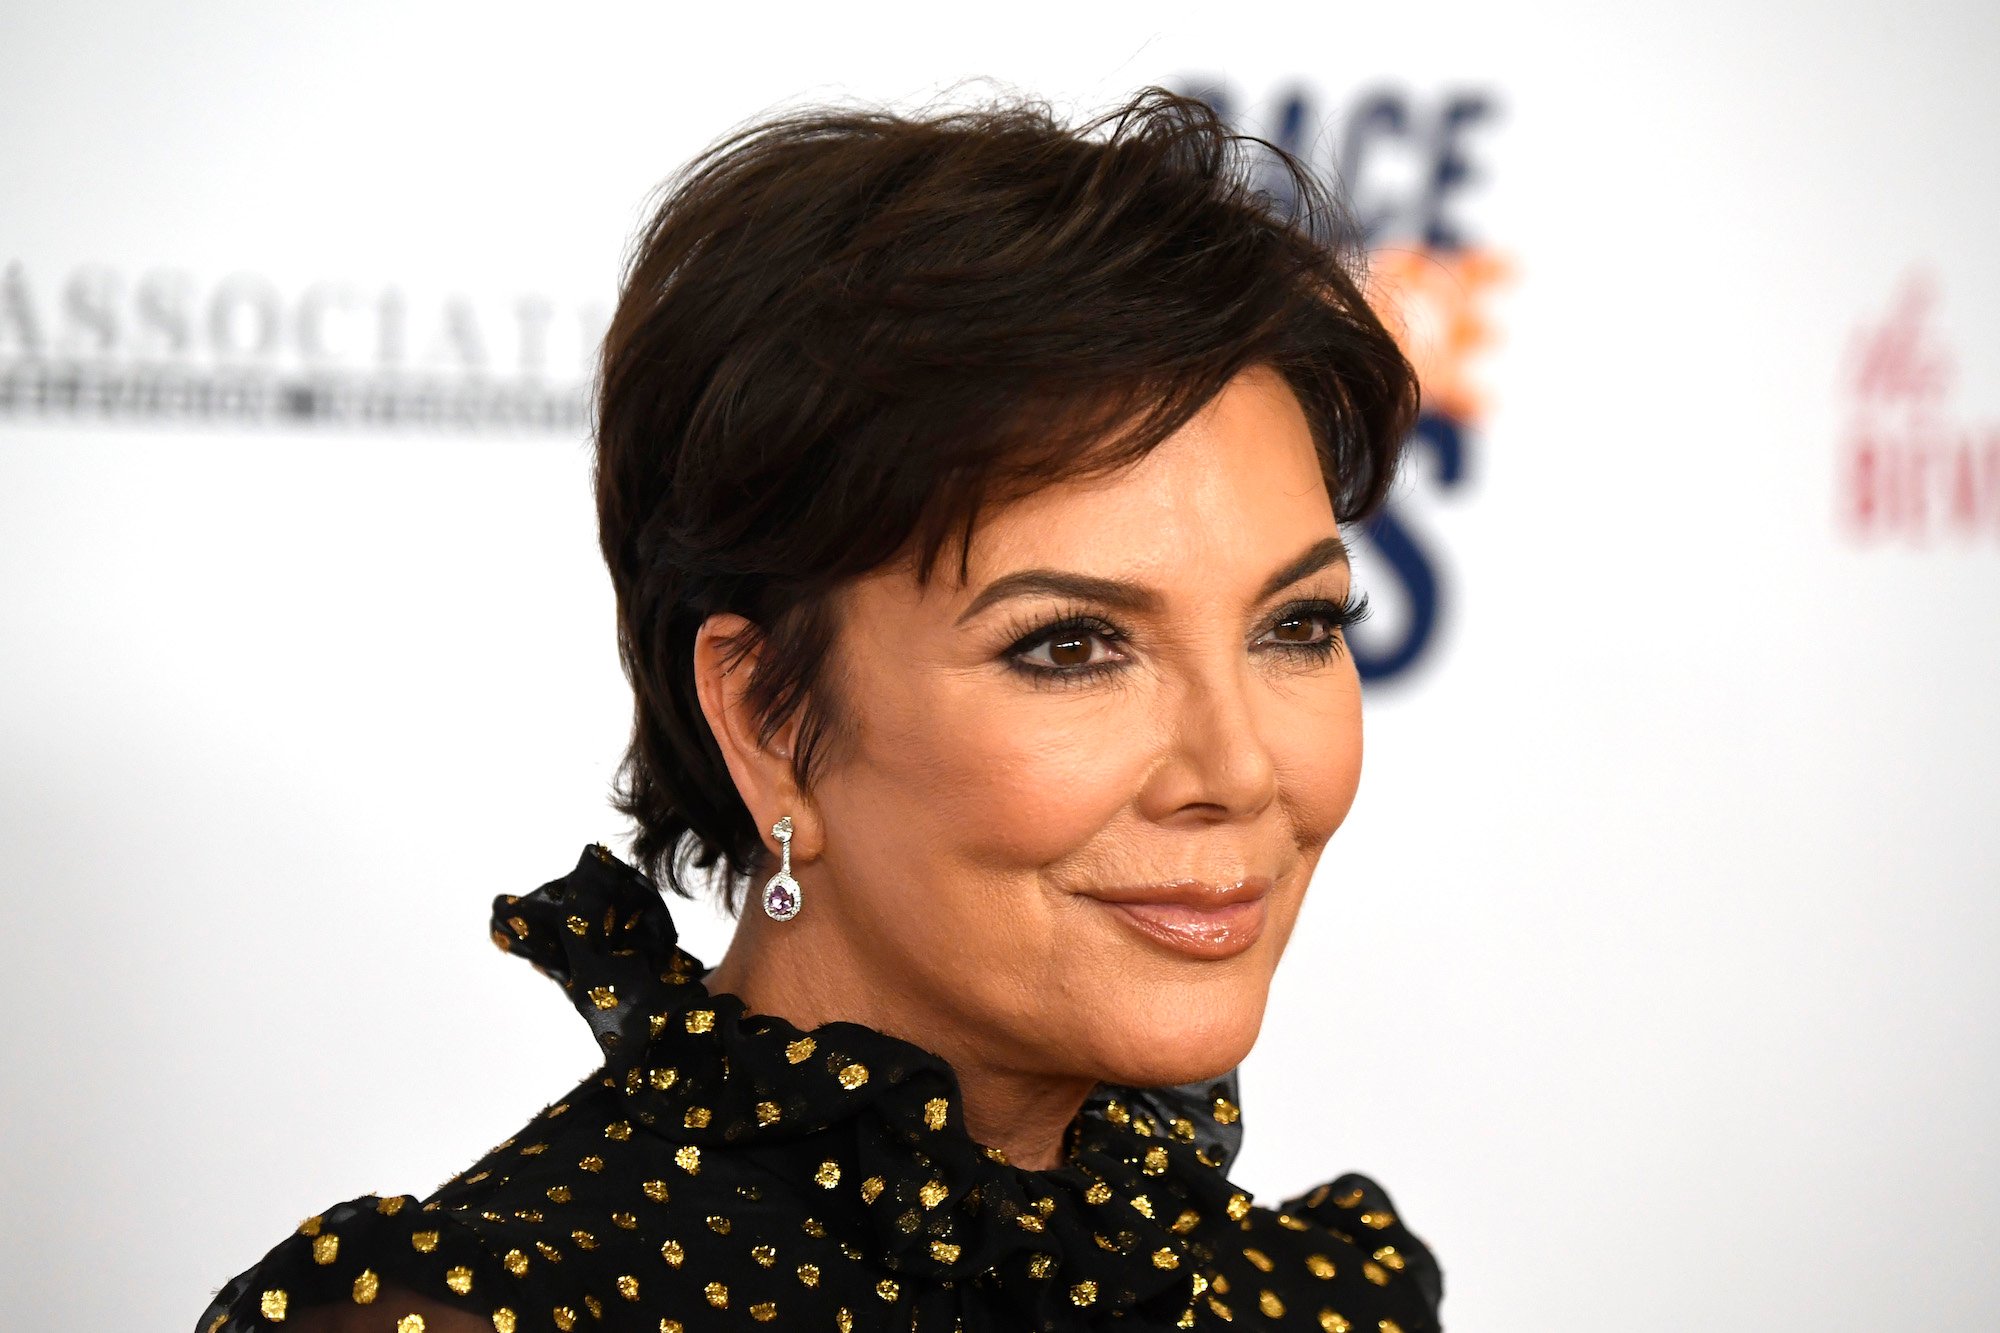 Kris Jenner smiling in front of a blurred white background, looking off camera